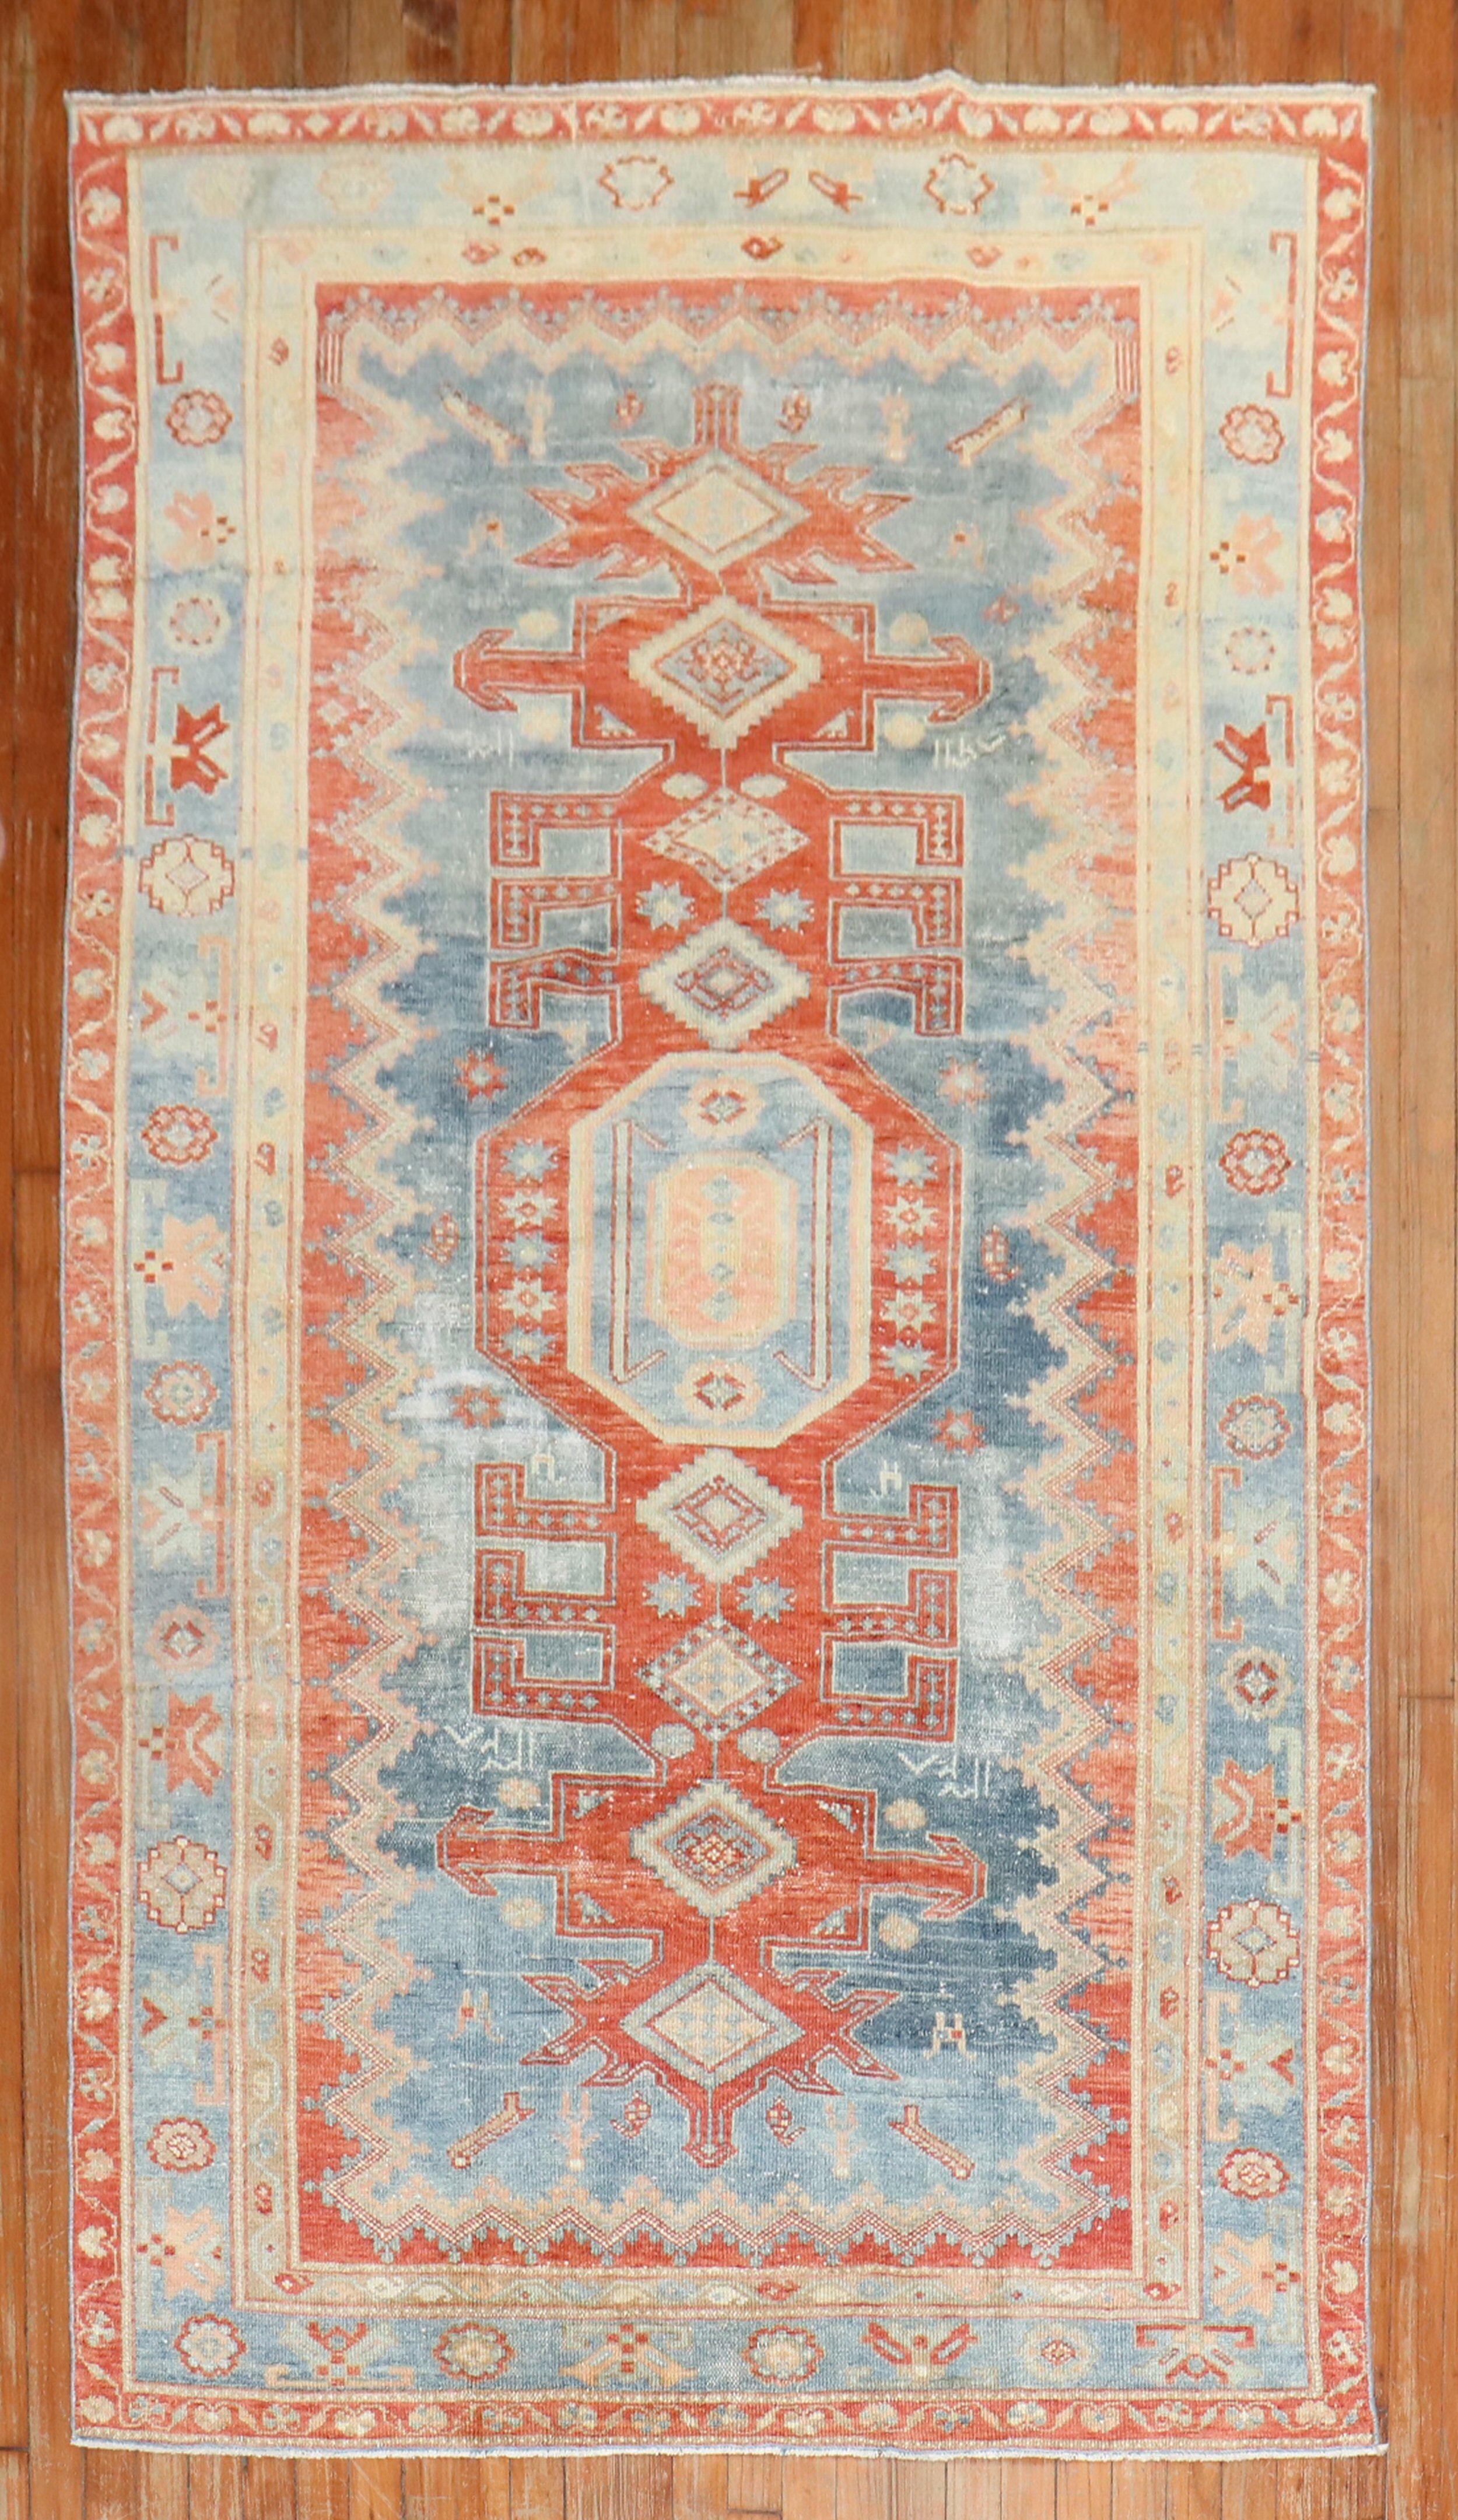 an early 20th Century Caucasian Kazak rug in faded blues and reds

4'6'' x 7'9''

